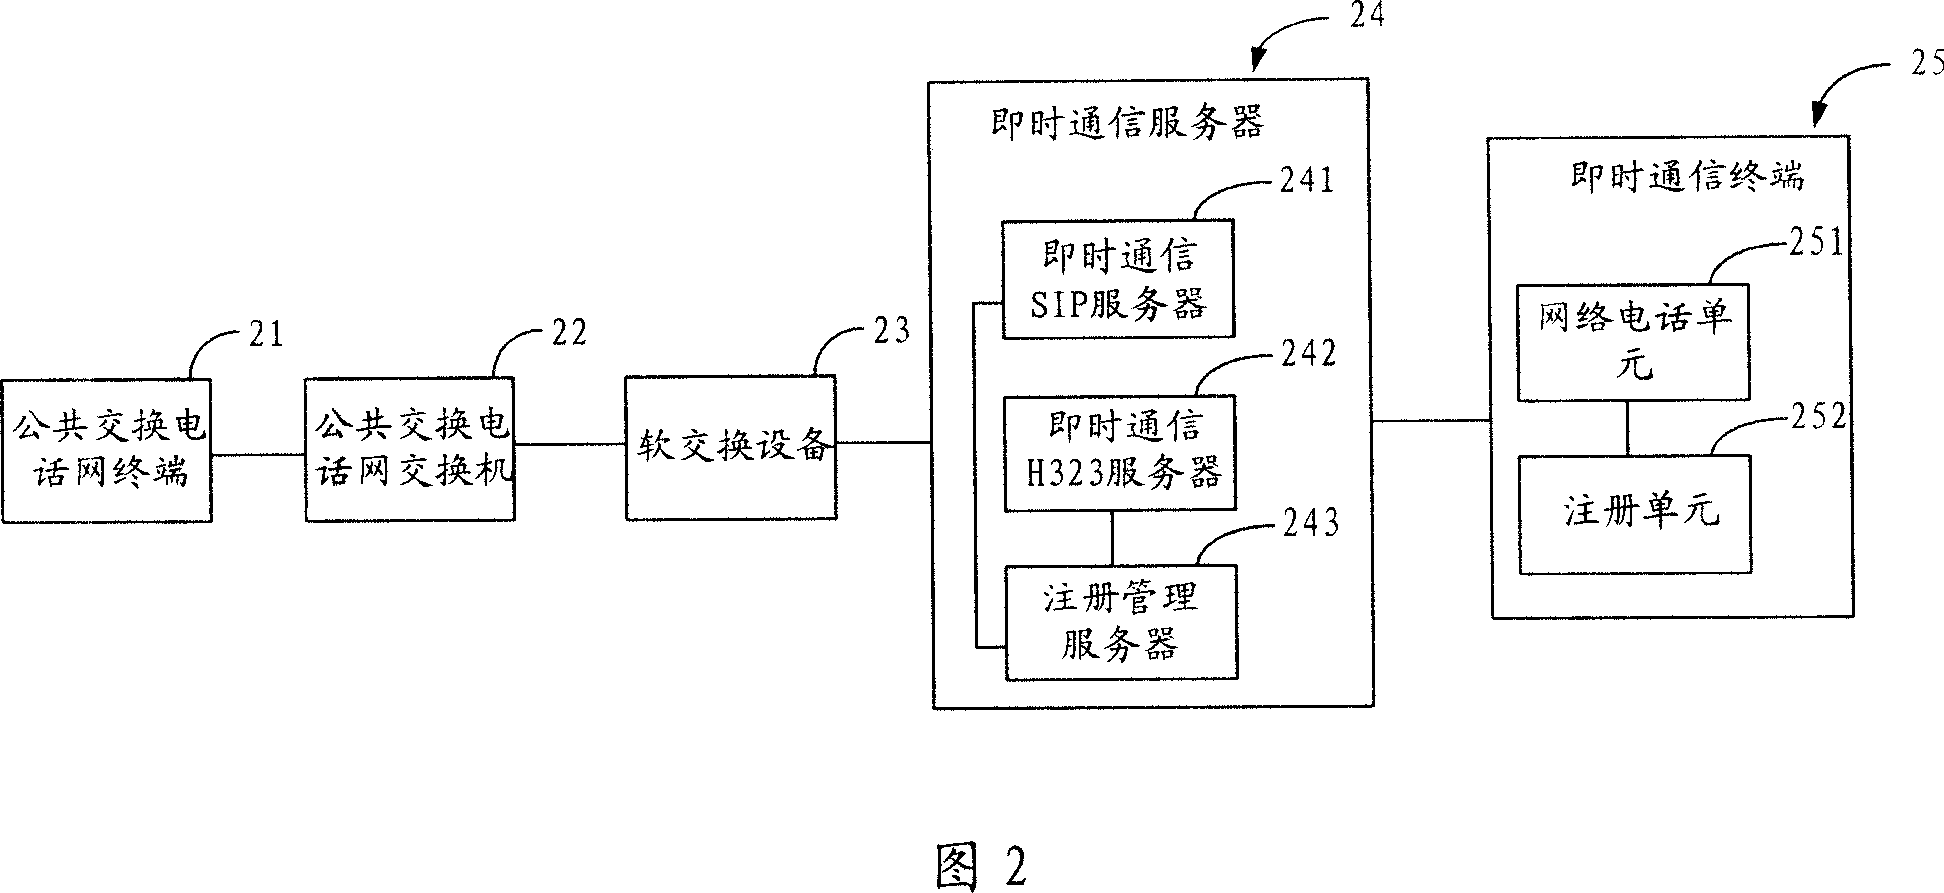 Method and system for messaging between public exchange telephone network terminal and immediate communication terminal